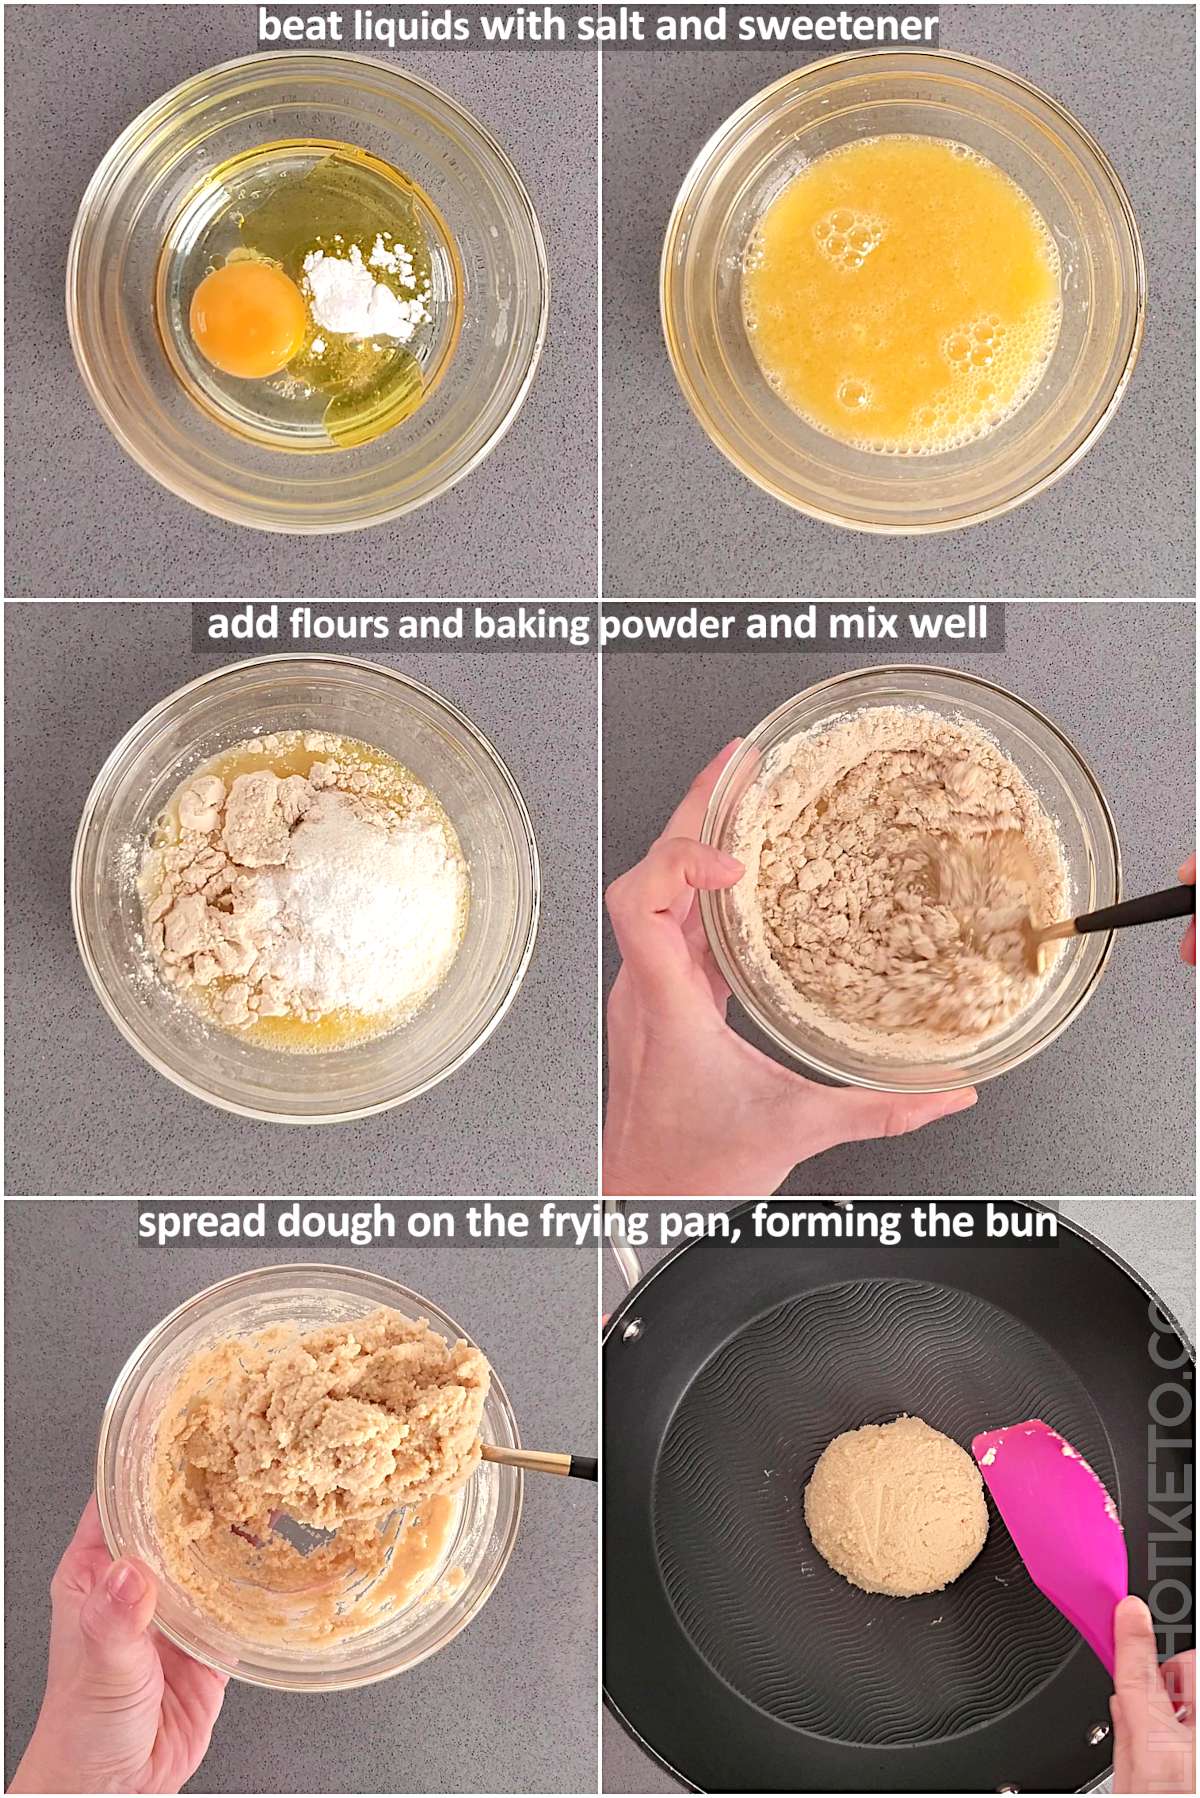 Photo collage with the steps to make keto fry pan protein buns: mixing eggs, dry ingredients, batter texture and spreading dough on the fry pan.